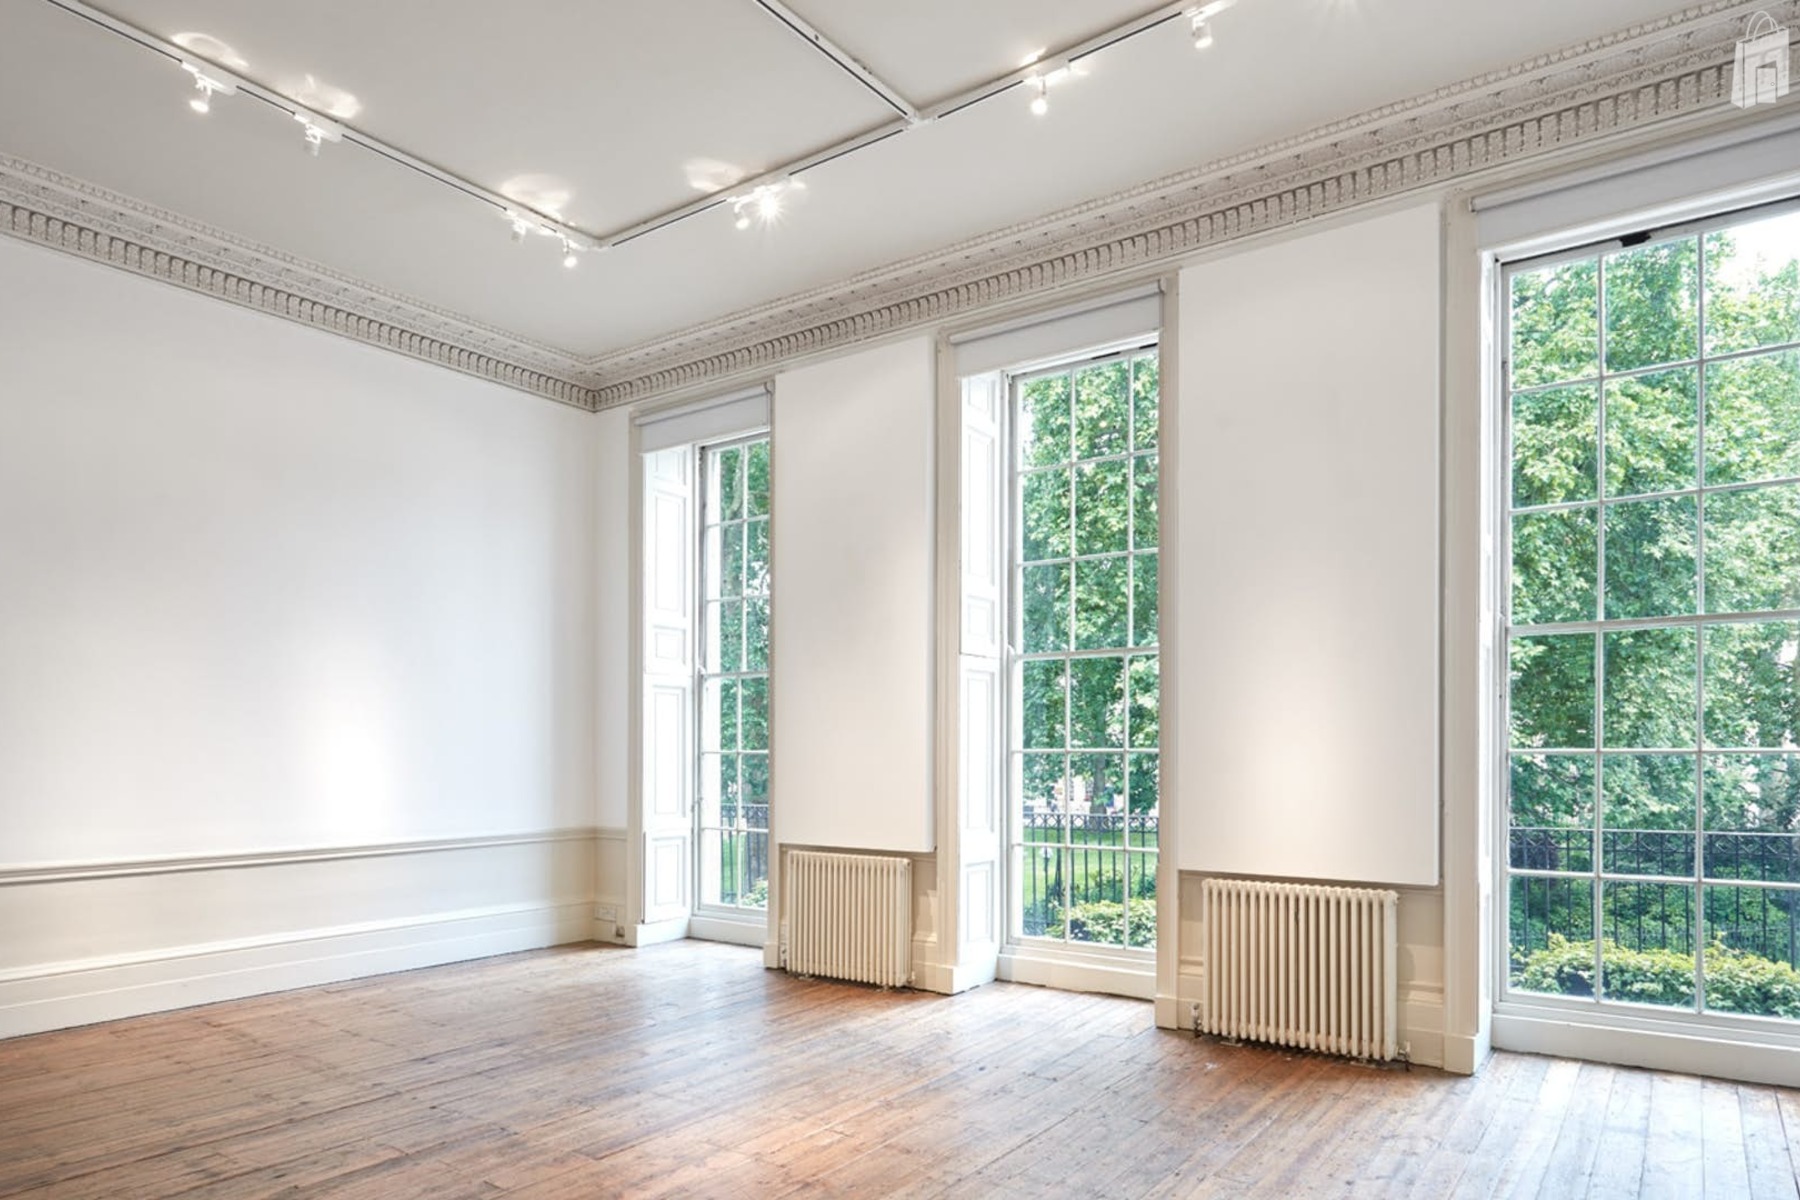 Gallery Space in Fitzrovia